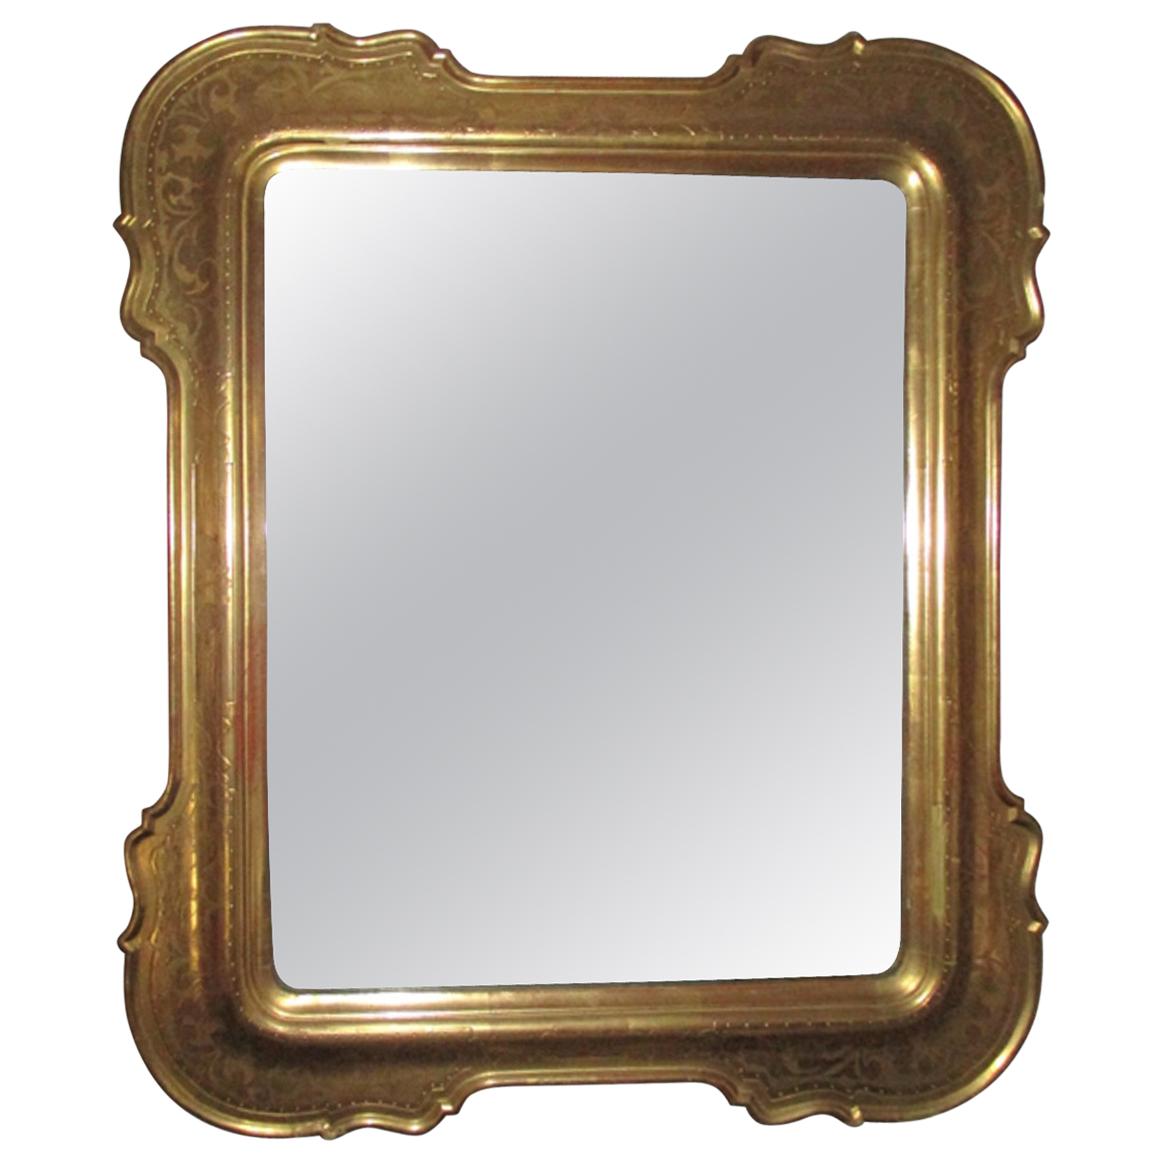 Italian, Genovese Etched Gold Leaf Mirror with Original Mercury Glass For Sale